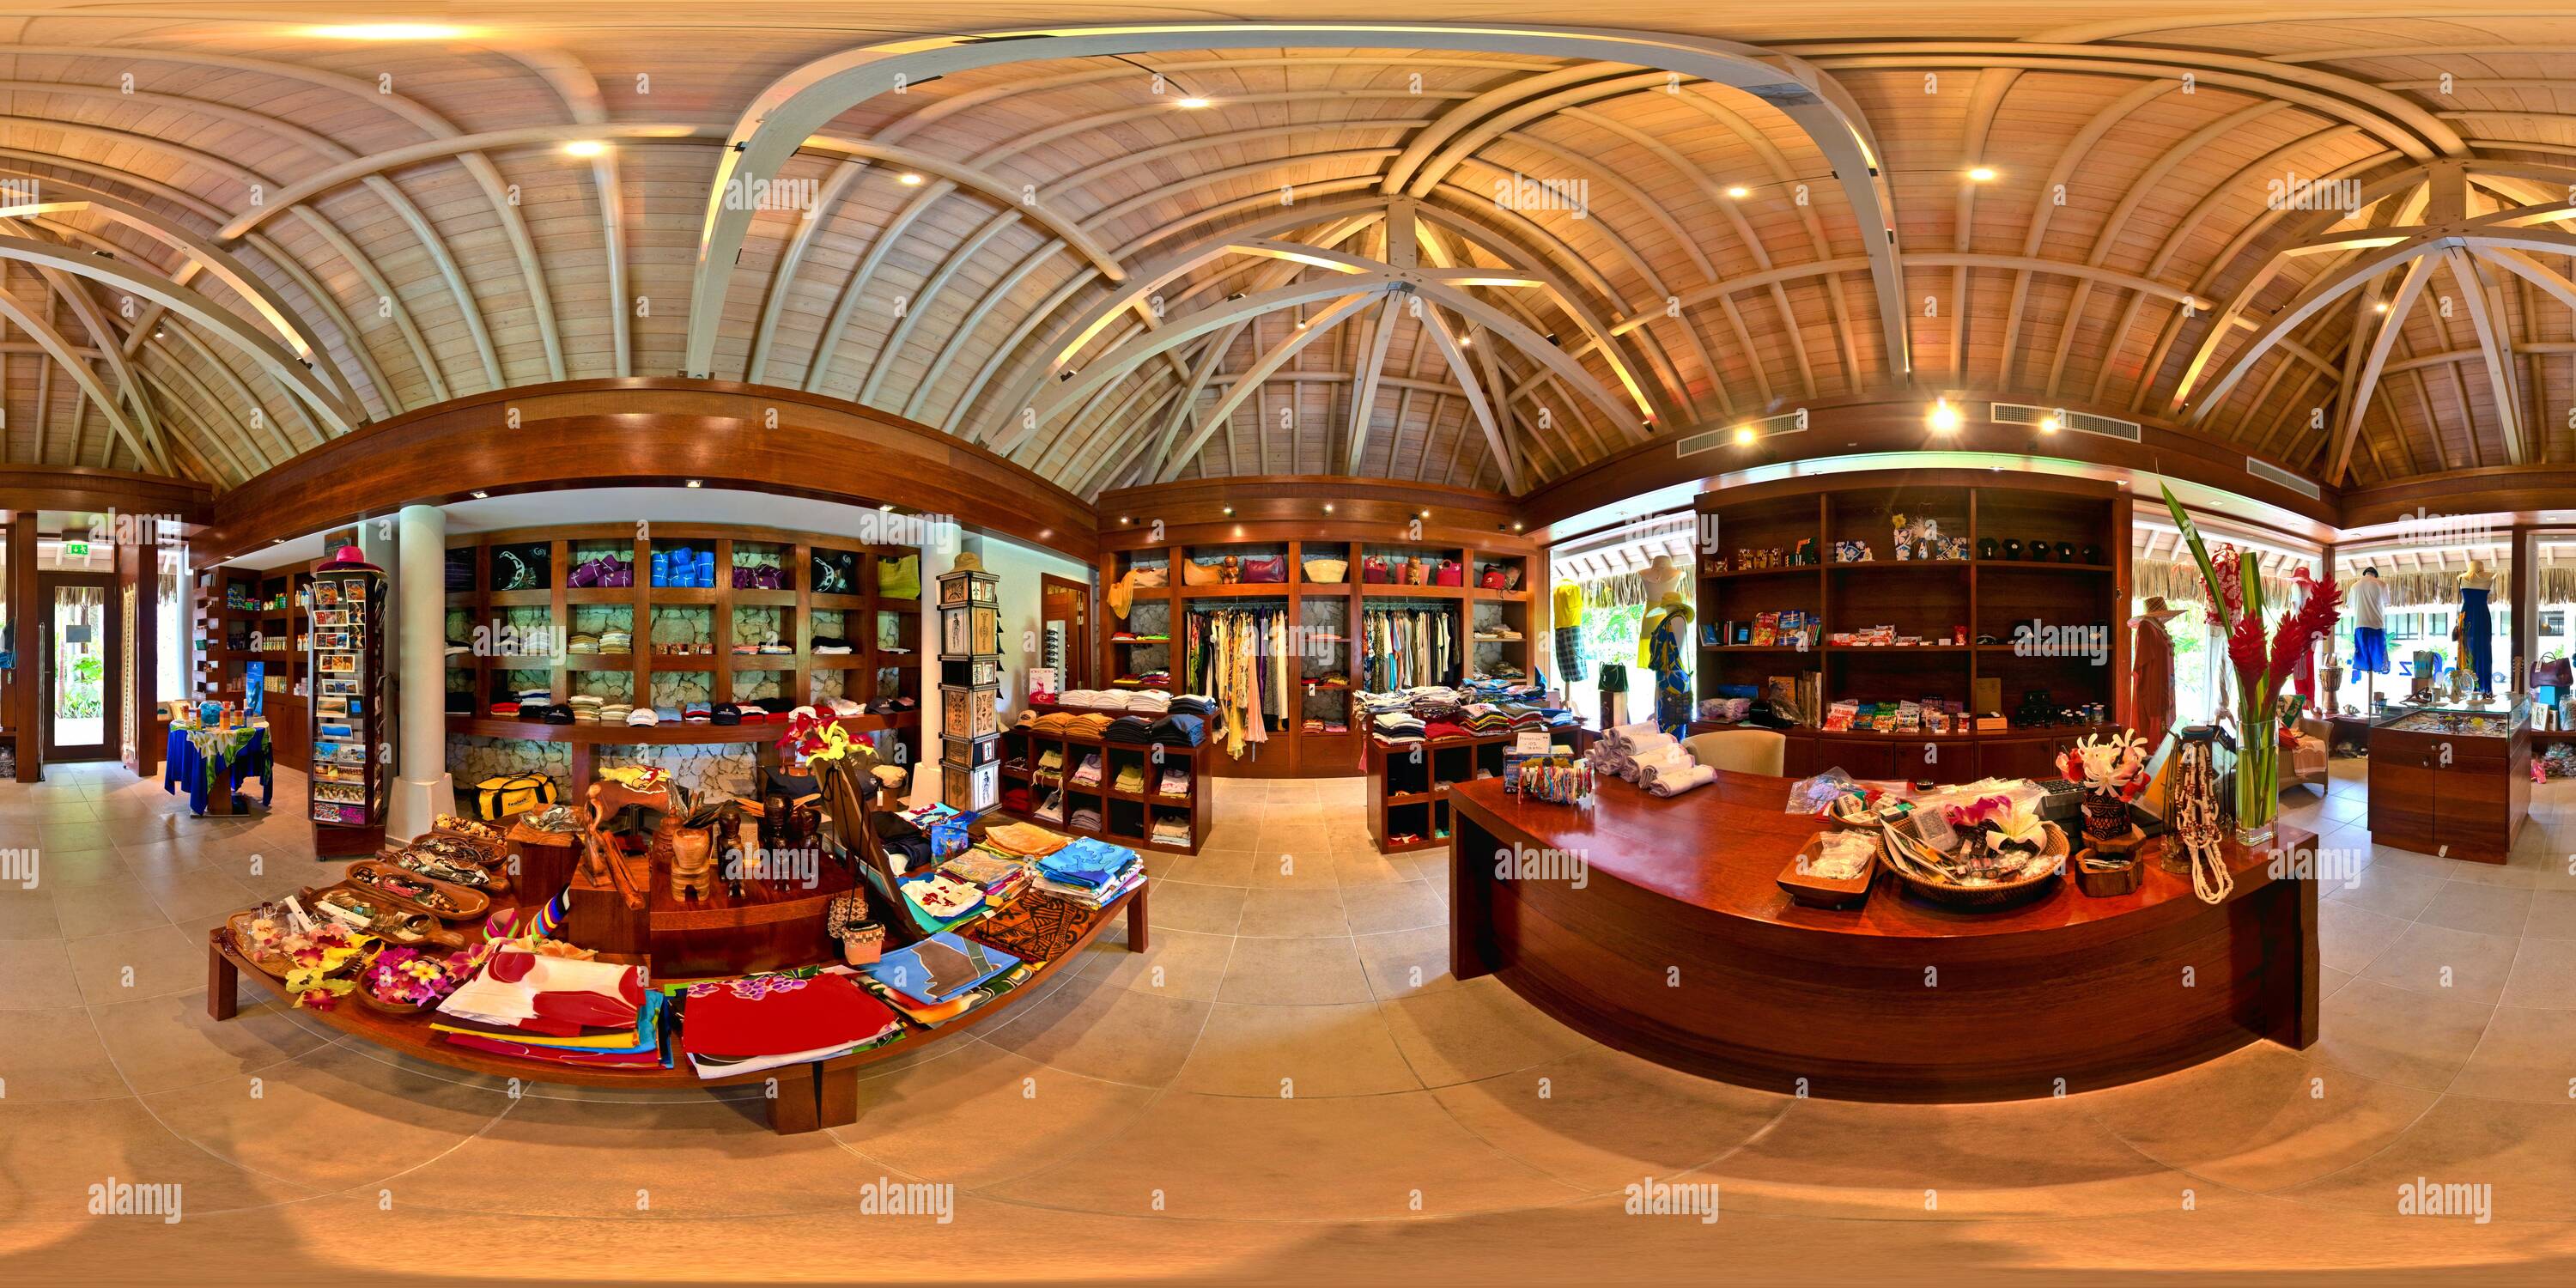 360 degree panoramic view of La Boutique